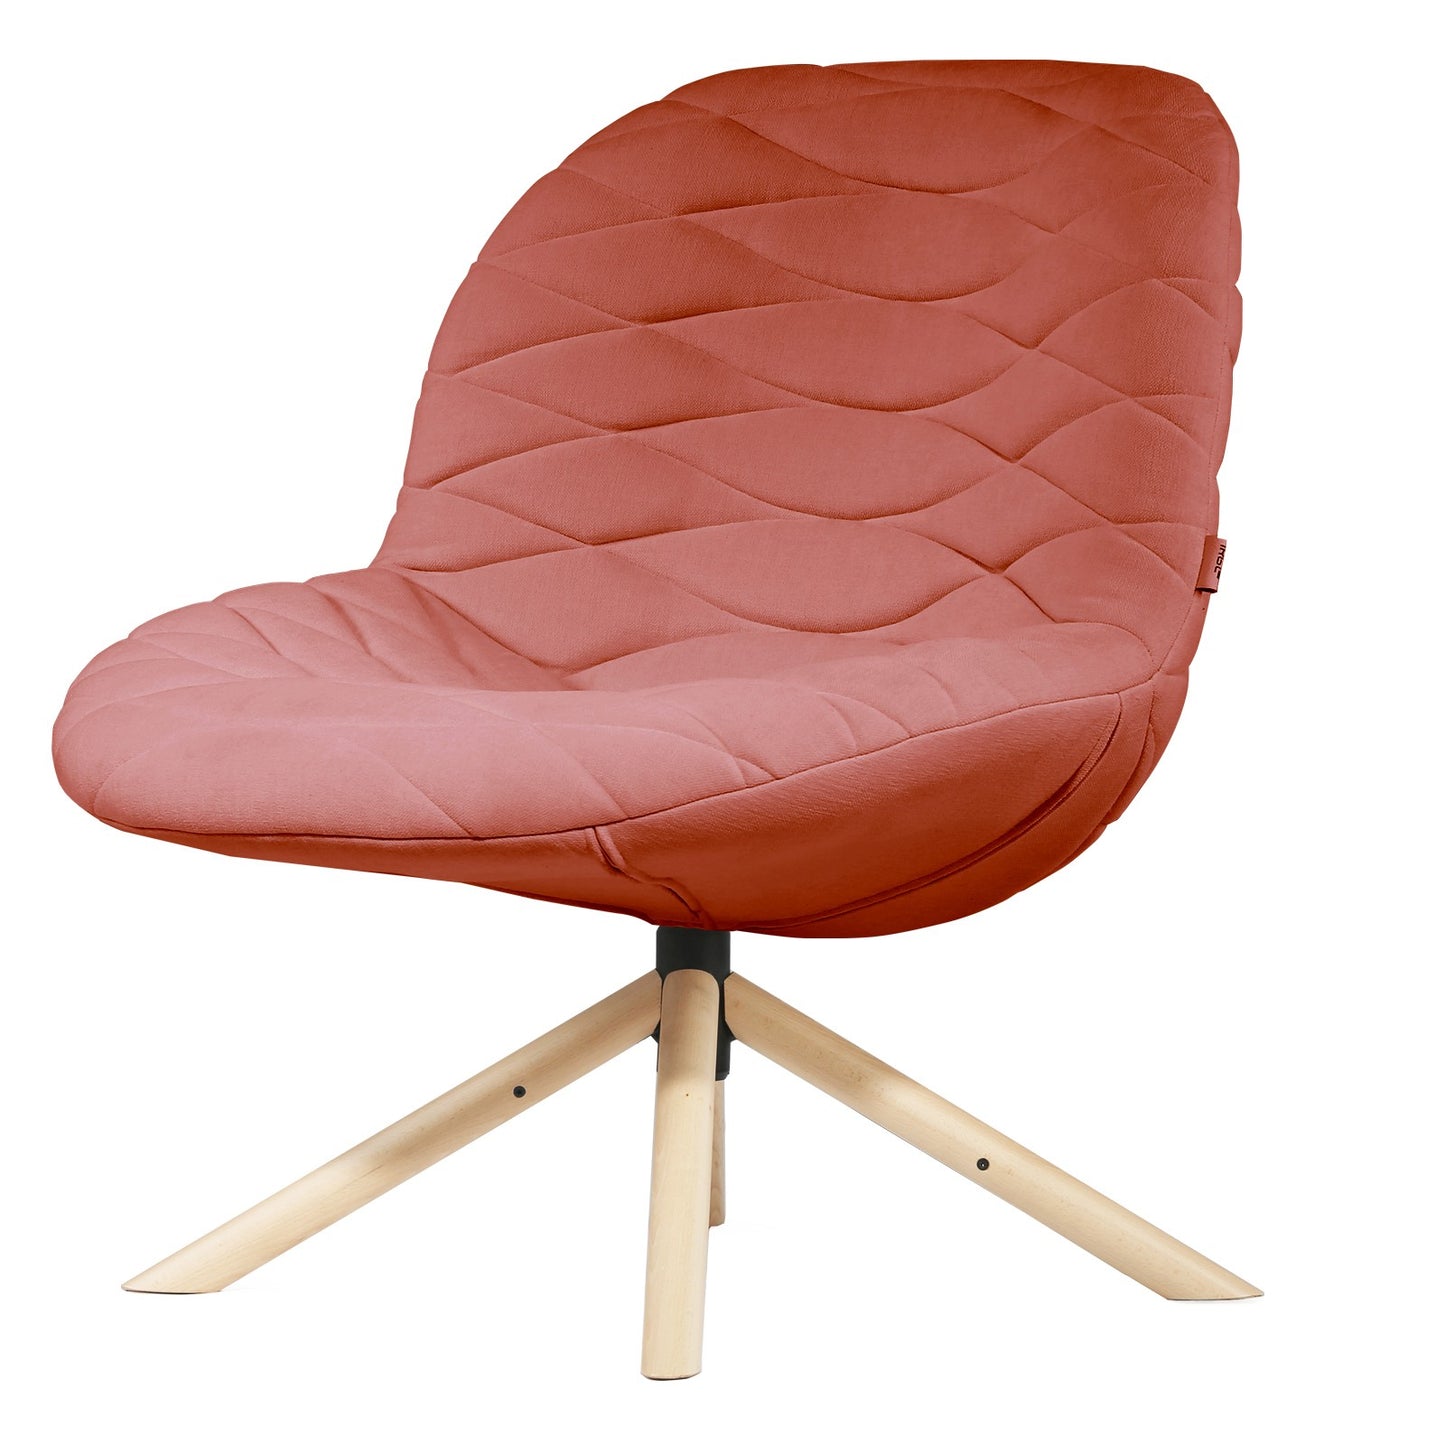 Lounge chair Mannequin Lounge 01 - Coral